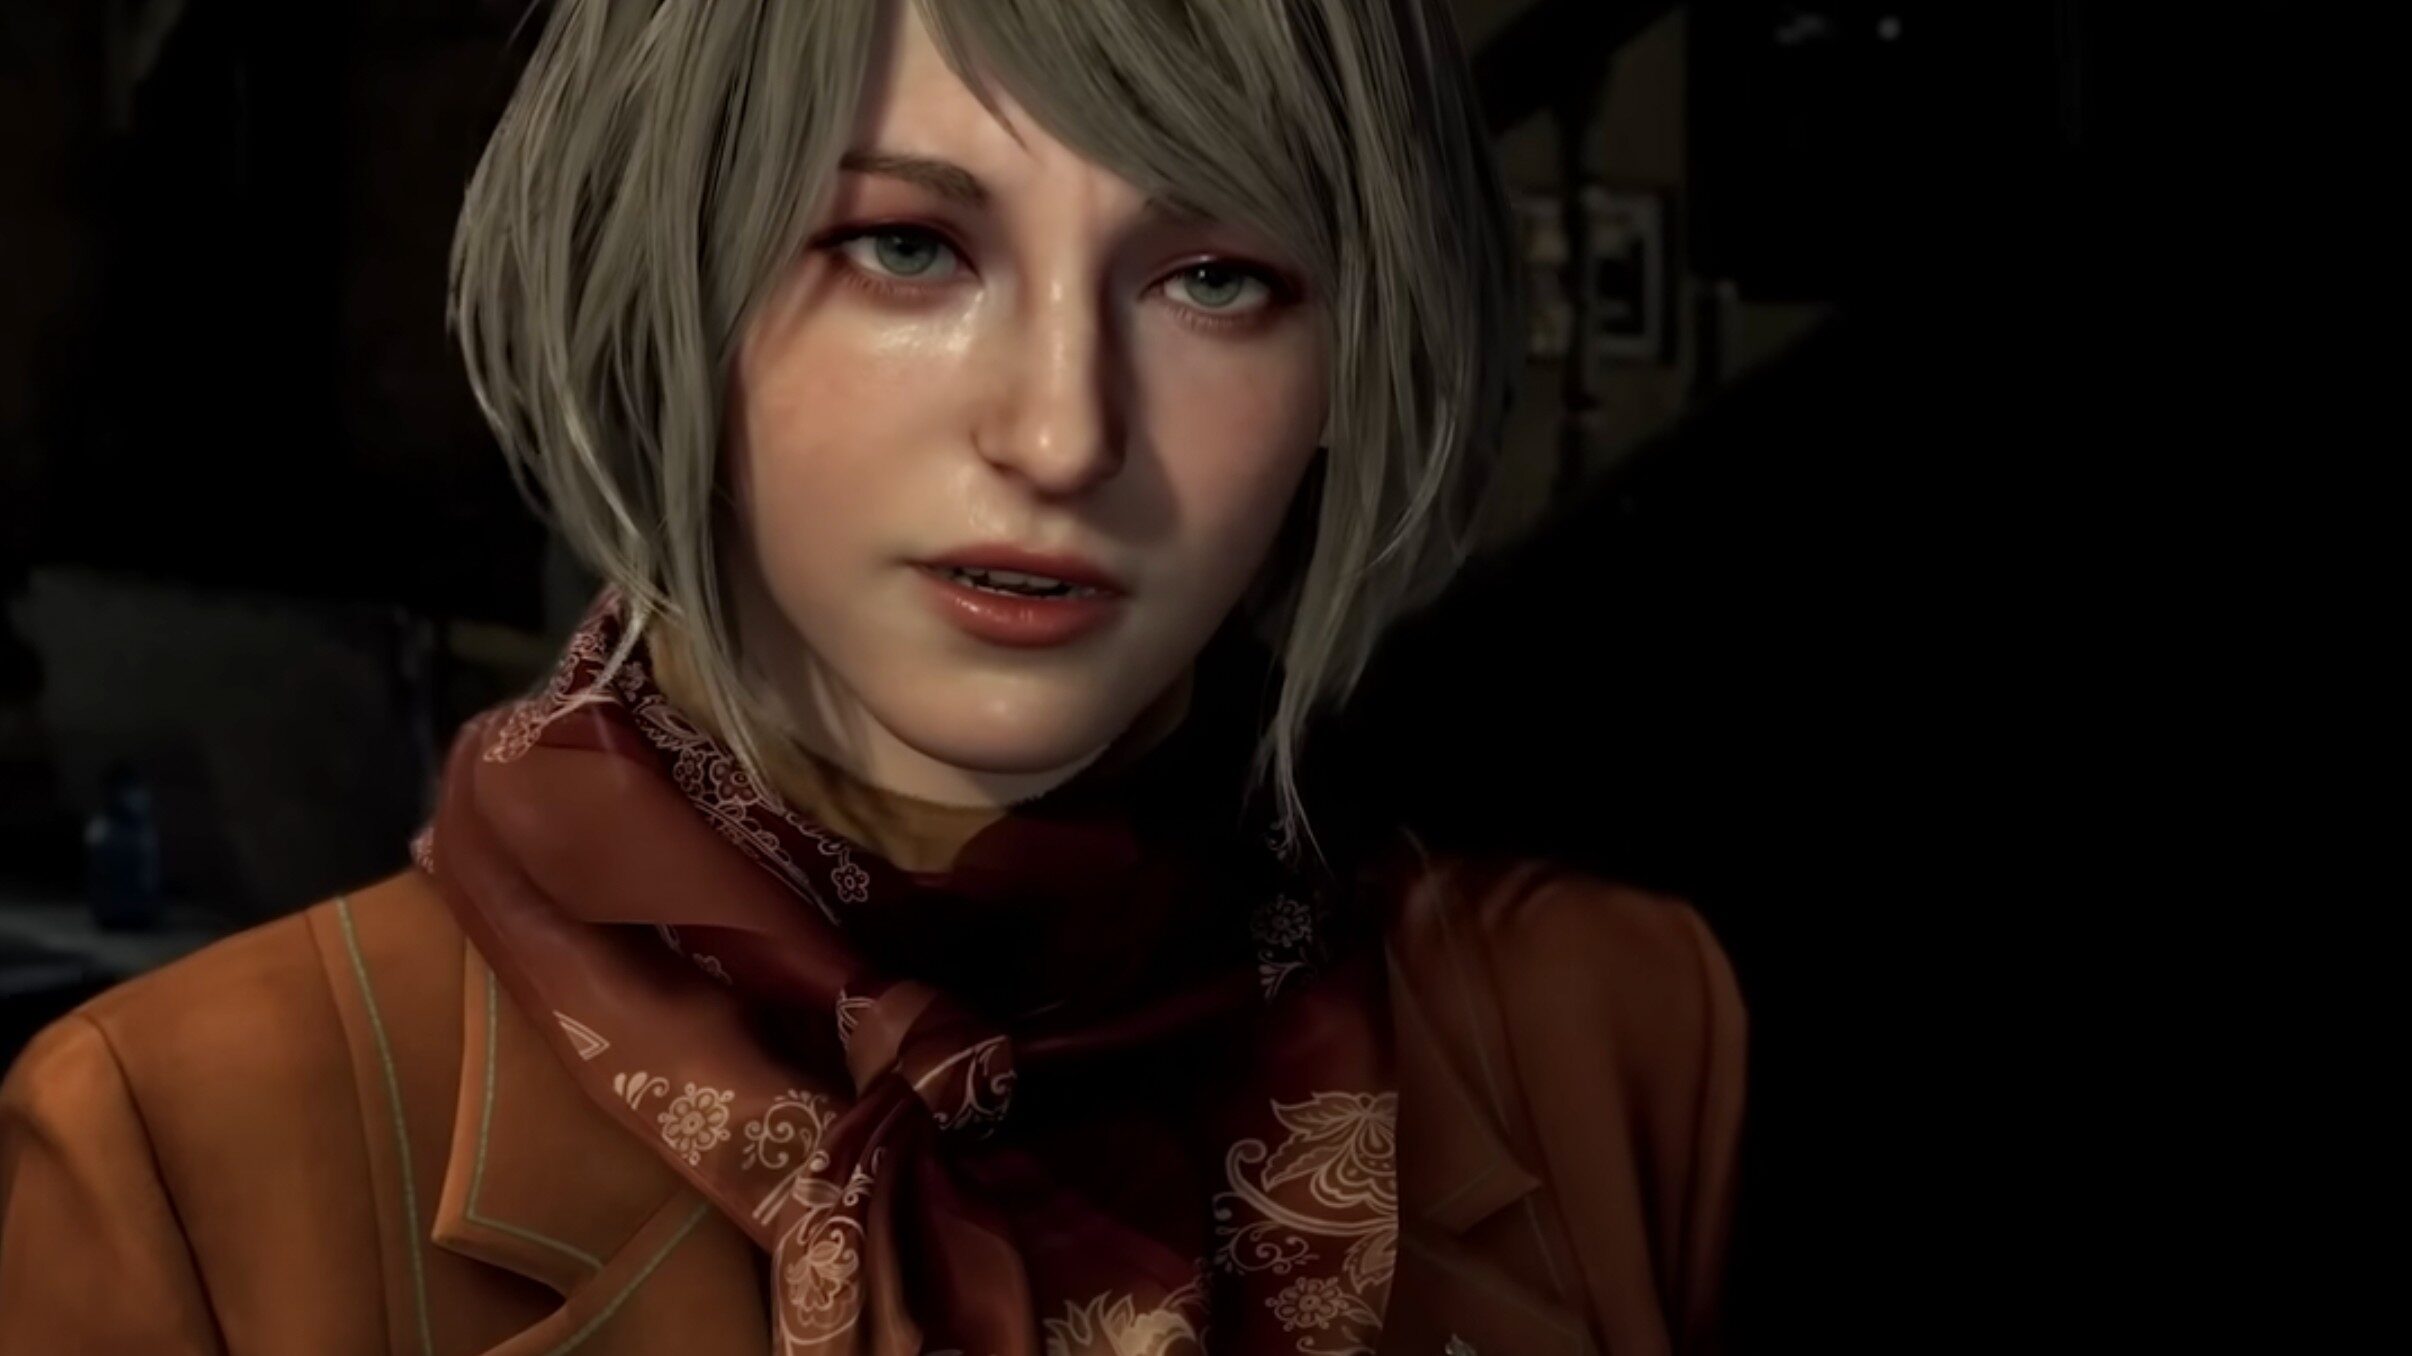 Resident Evil 4 Remake's new Ashley model is portrayed by an